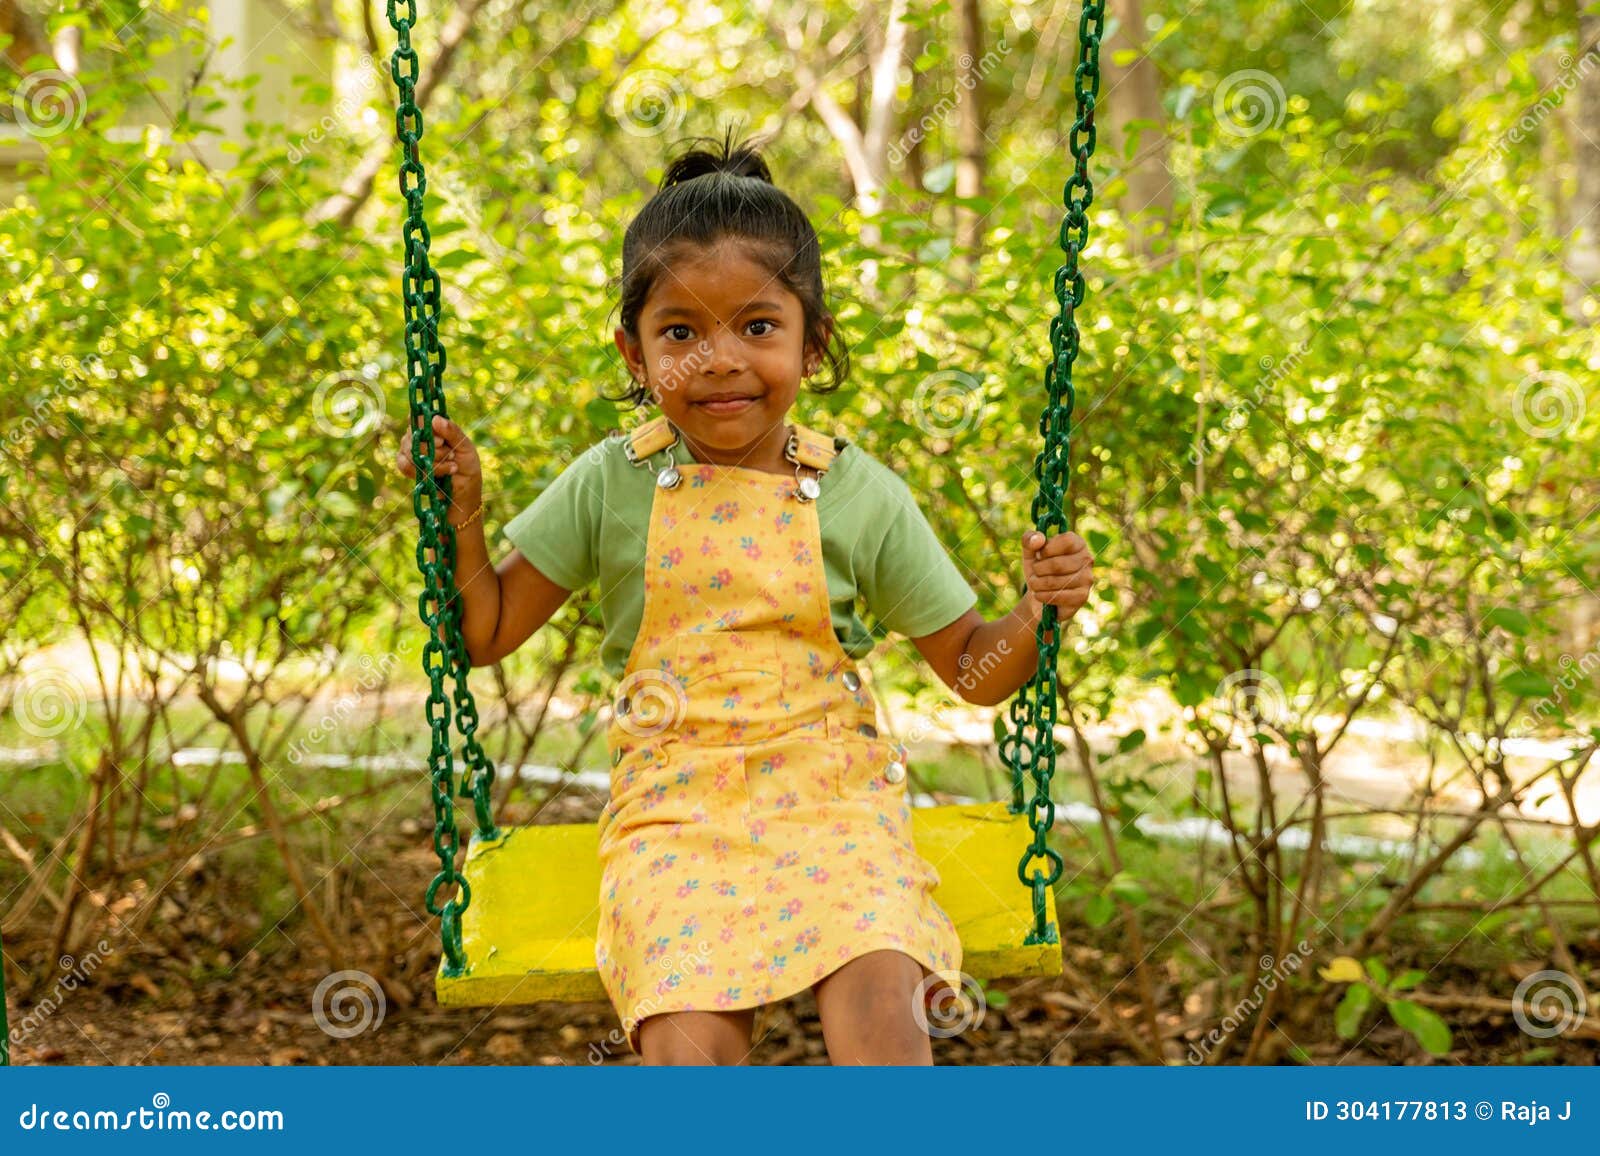 joyful young girl swinging in a park chair